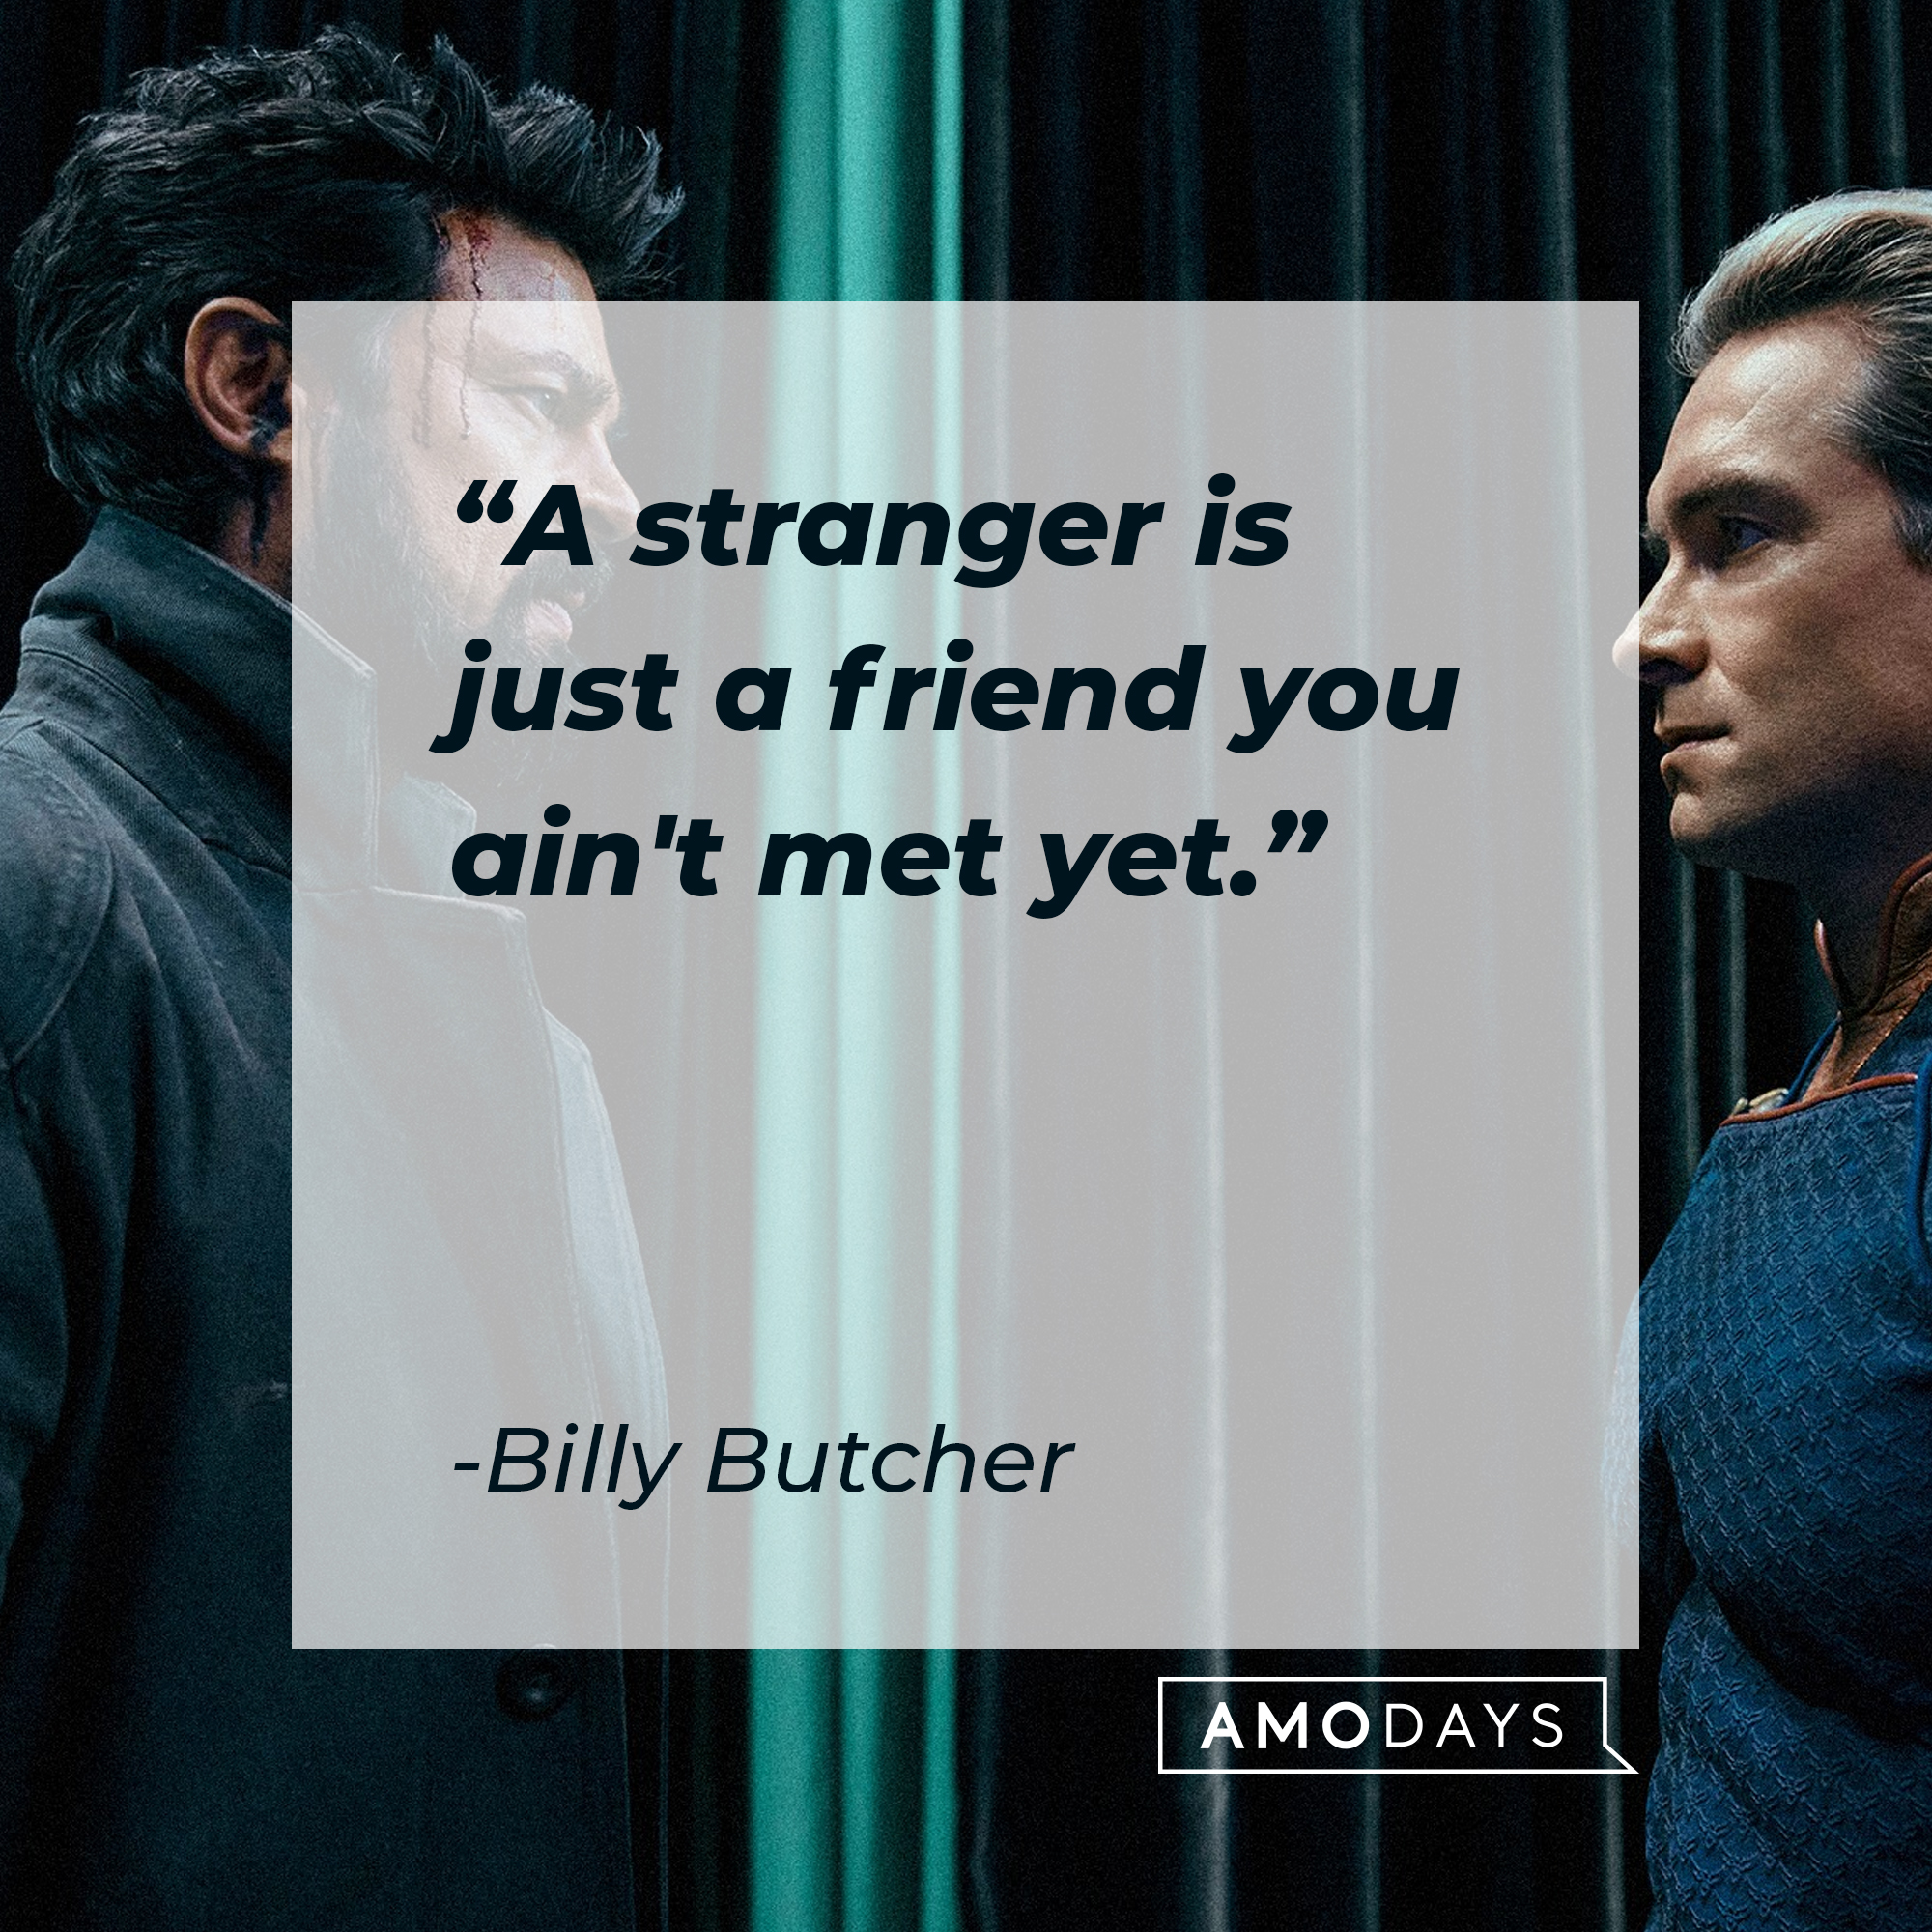 Billy Butcher's quote: "A stranger is just, a friend you ain't met yet." | Source: Facebook.com/TheBoysTV